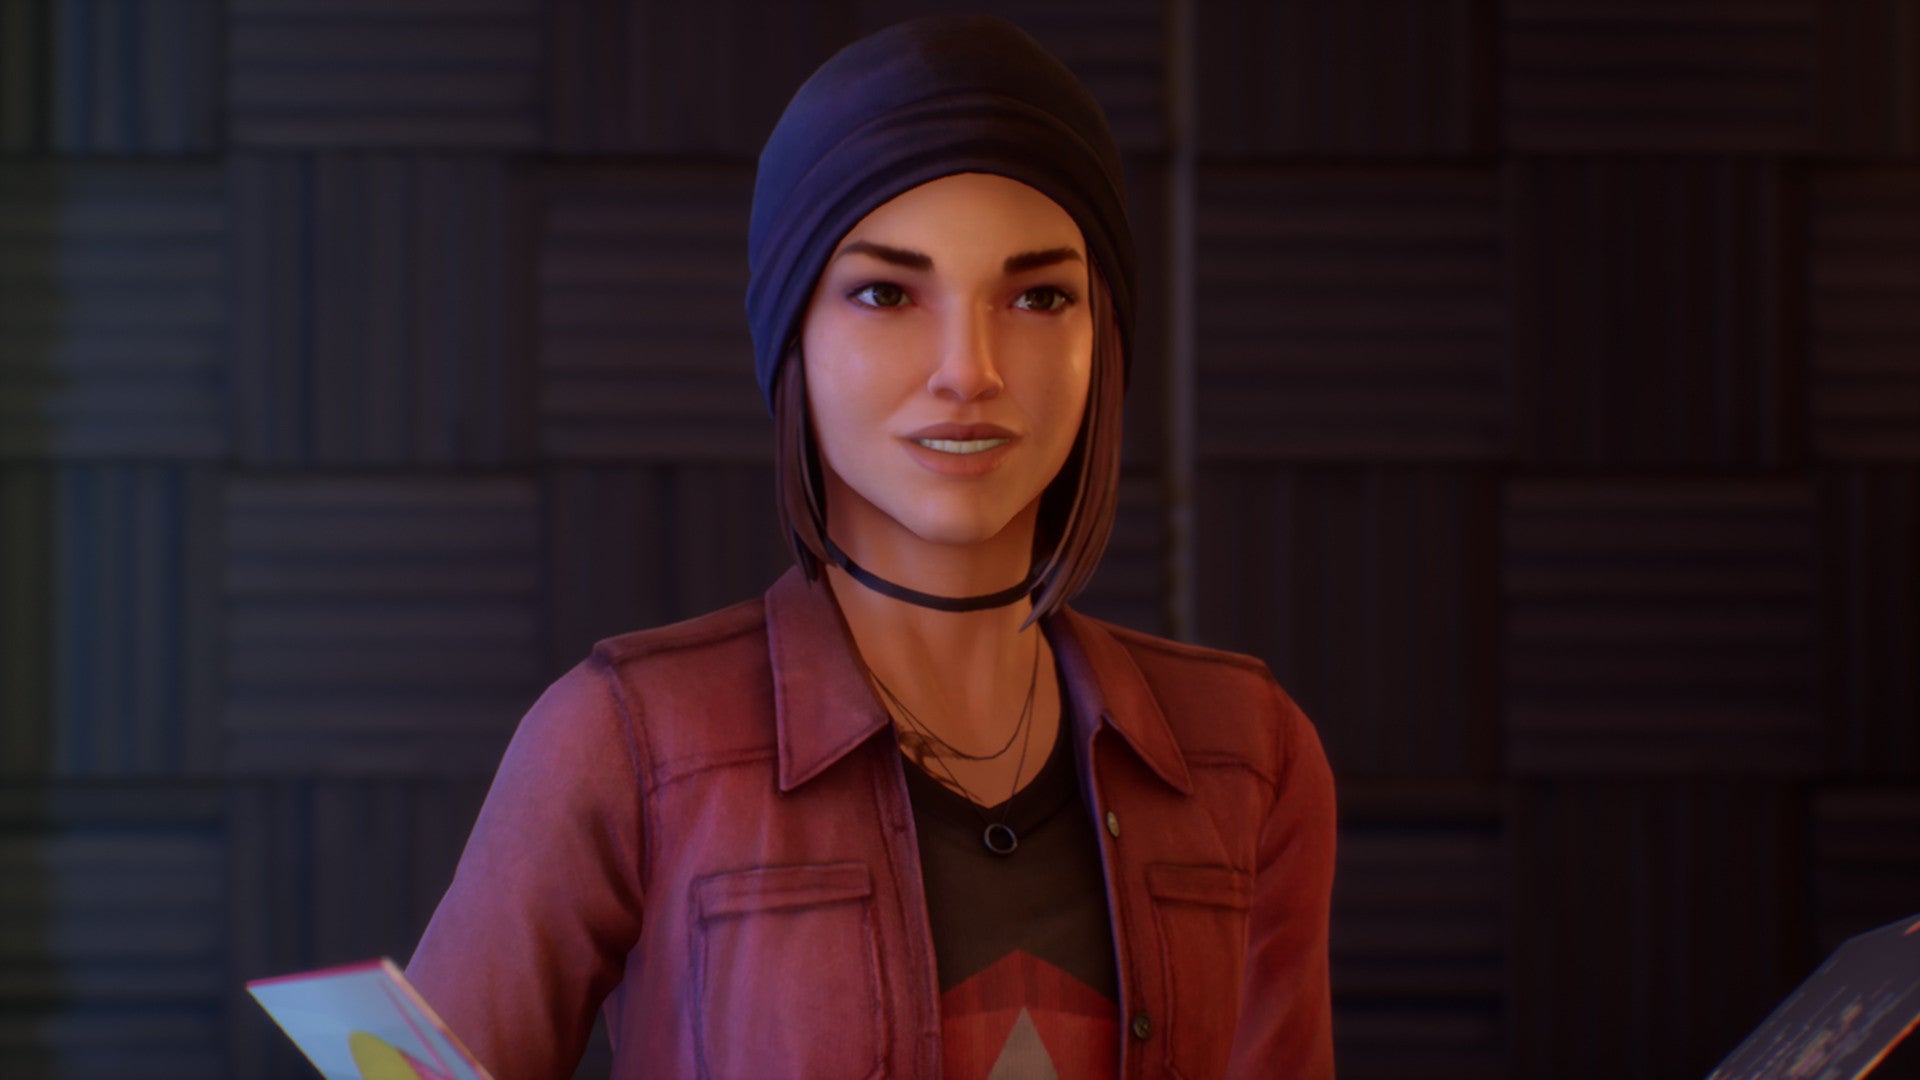 Steph Gingrich in close-up, as she appears during her introductory scene in Life Is Strange: True Colors.